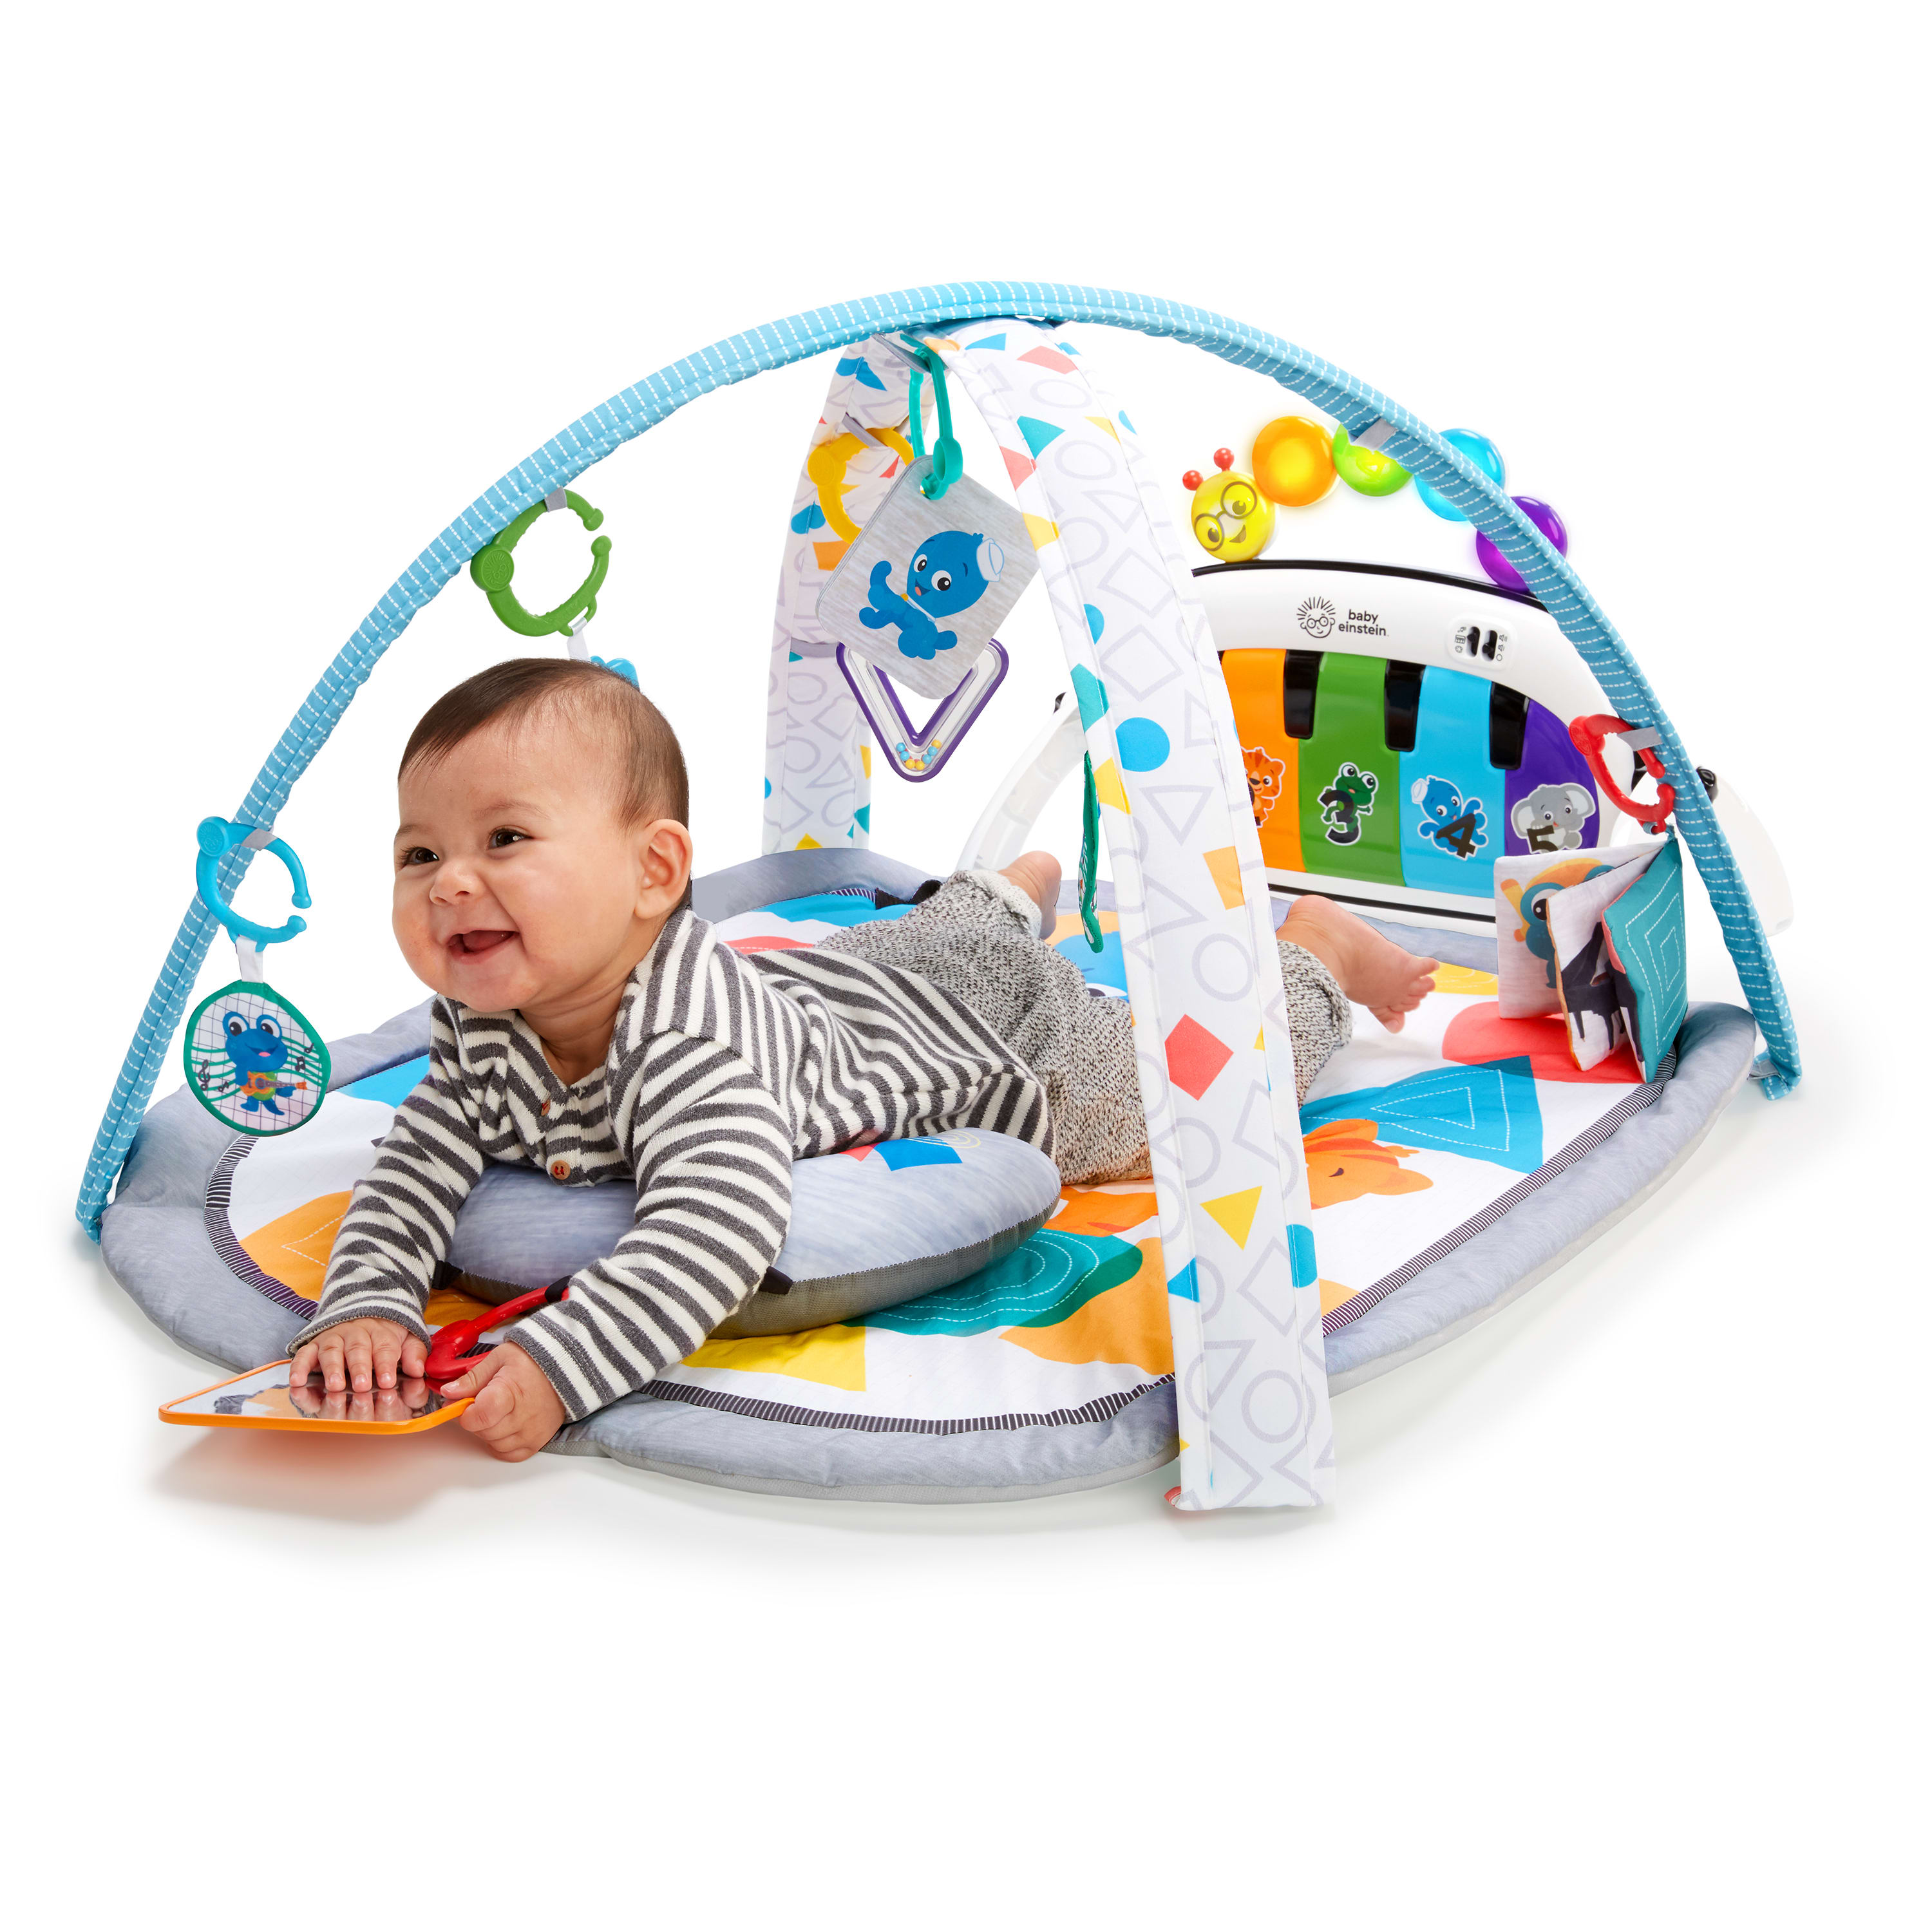 Baby Einstein Kickin' Tunes 4-in-1 Baby Activity Gym & Tummy Time Play Mat with Piano, 0-36 Months, Multicolor - image 5 of 18